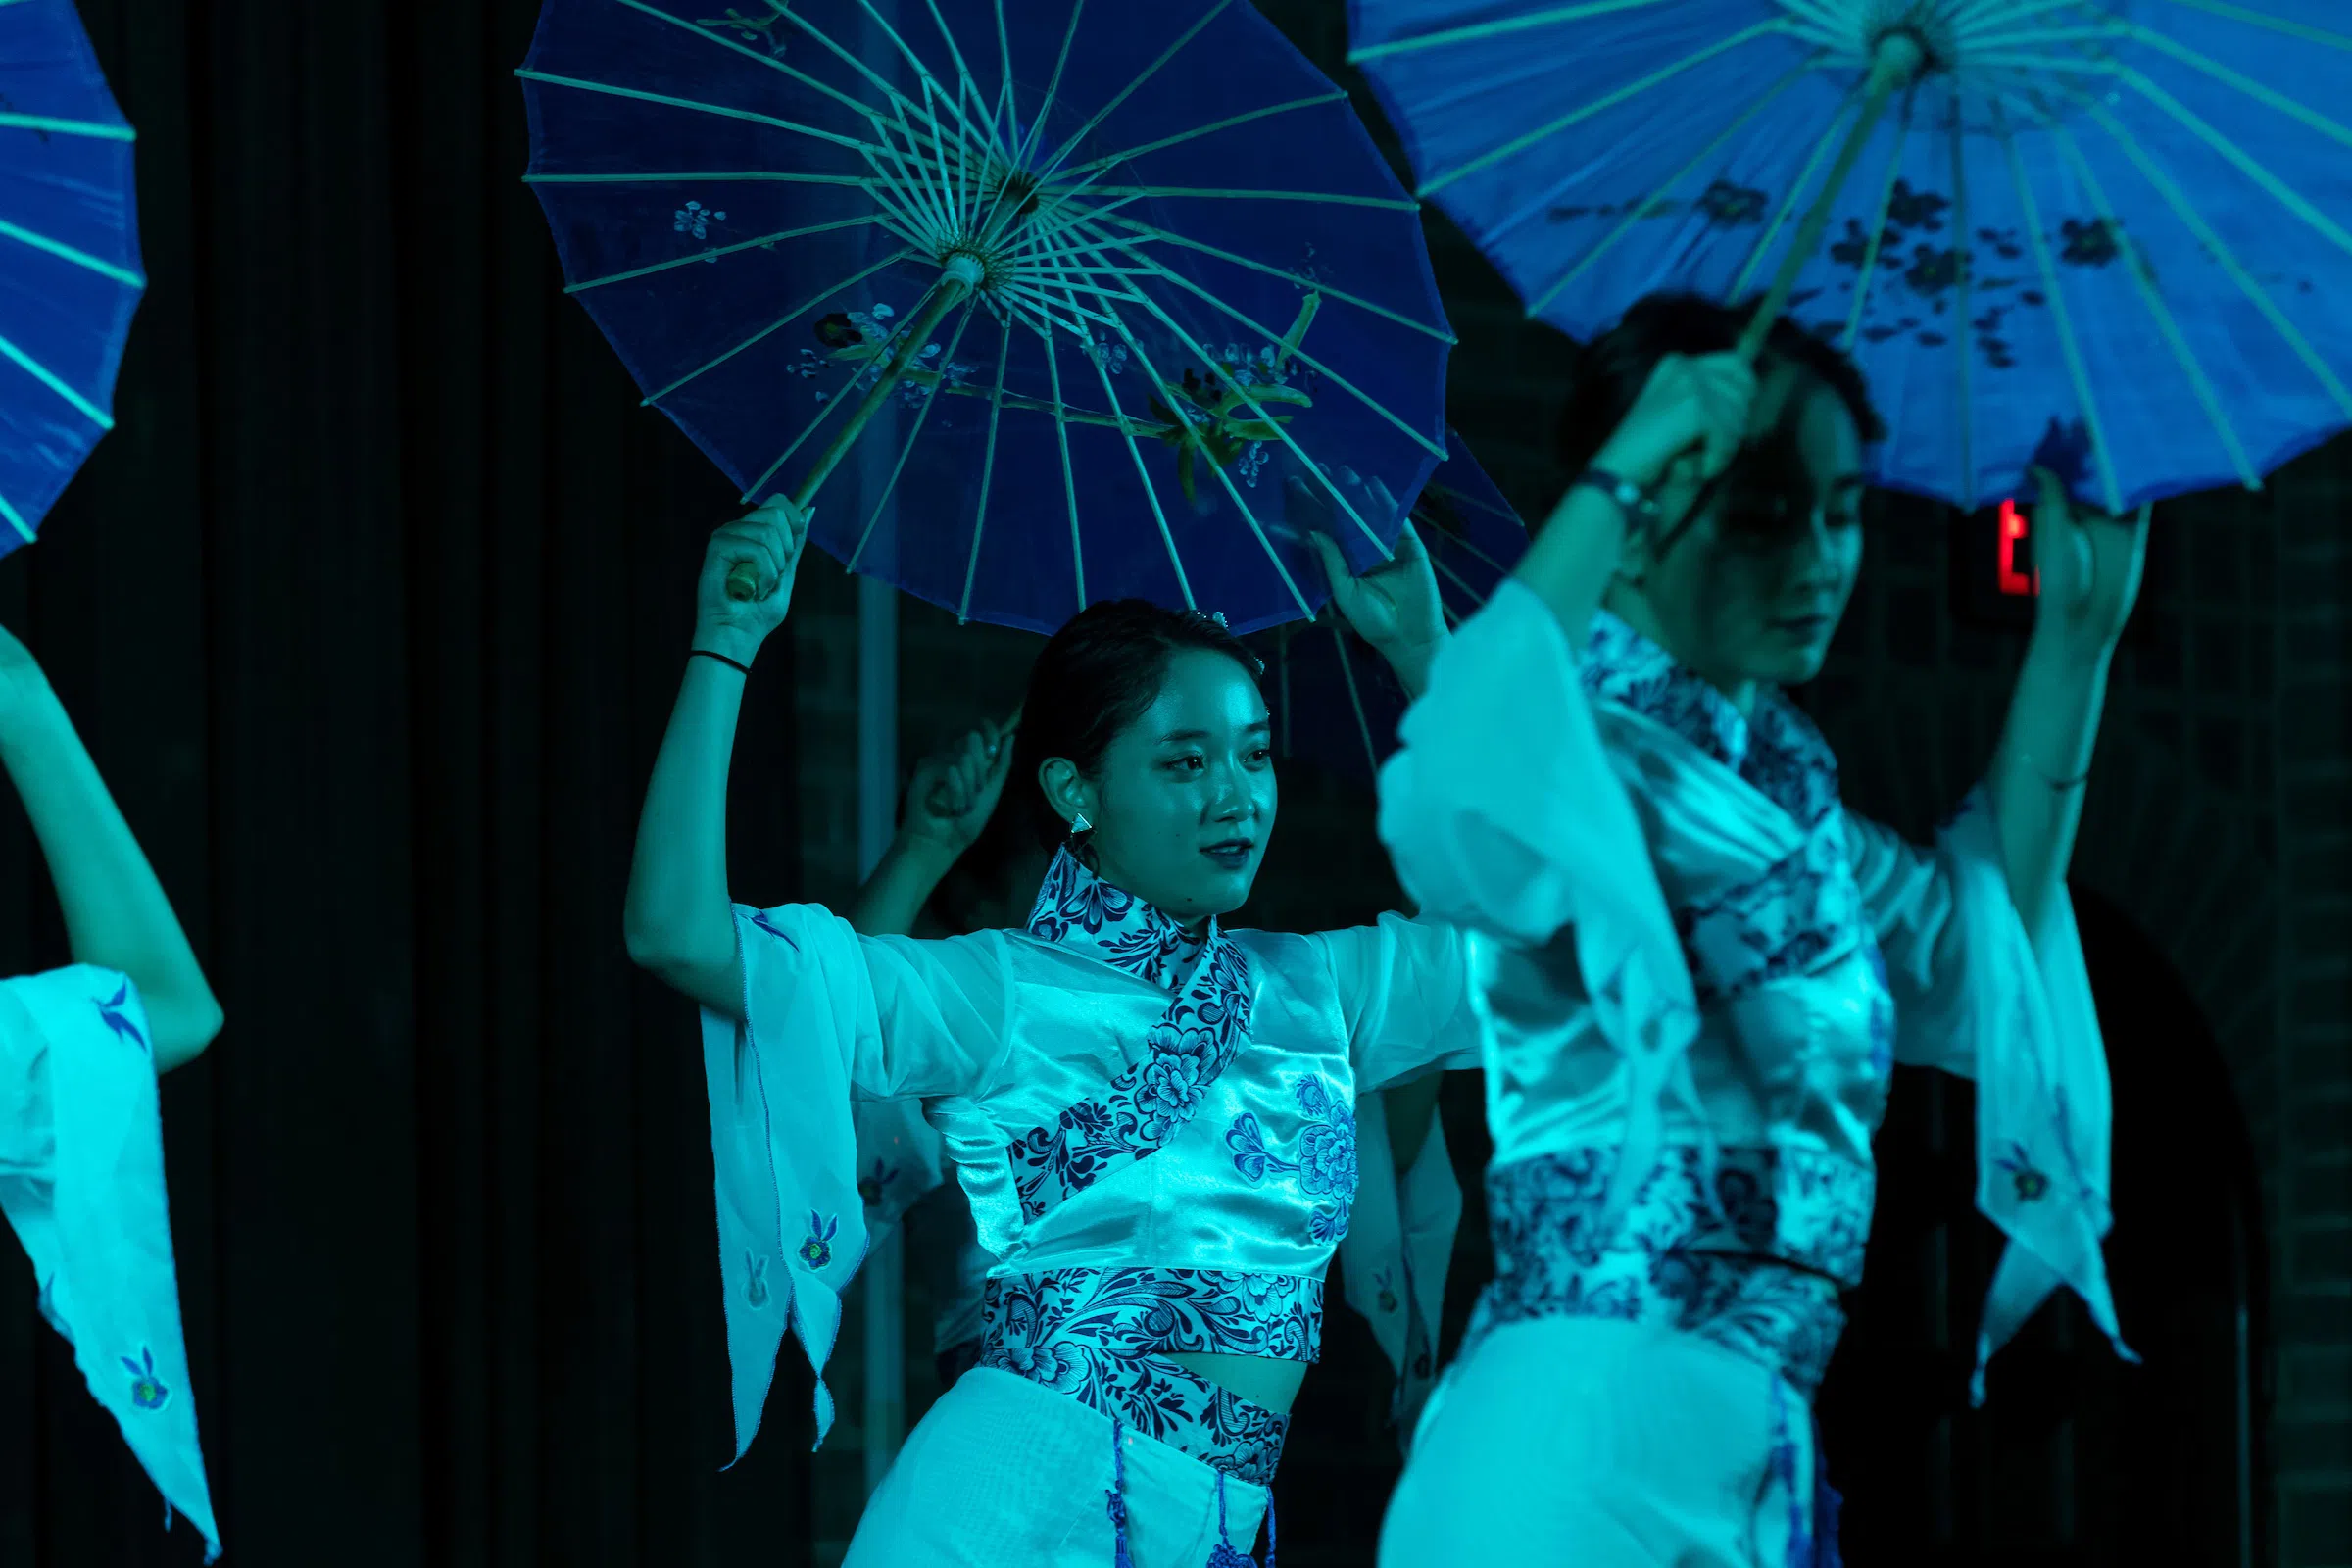 Rice University's Chinese Student Association students performing in the Lunar New Year Show